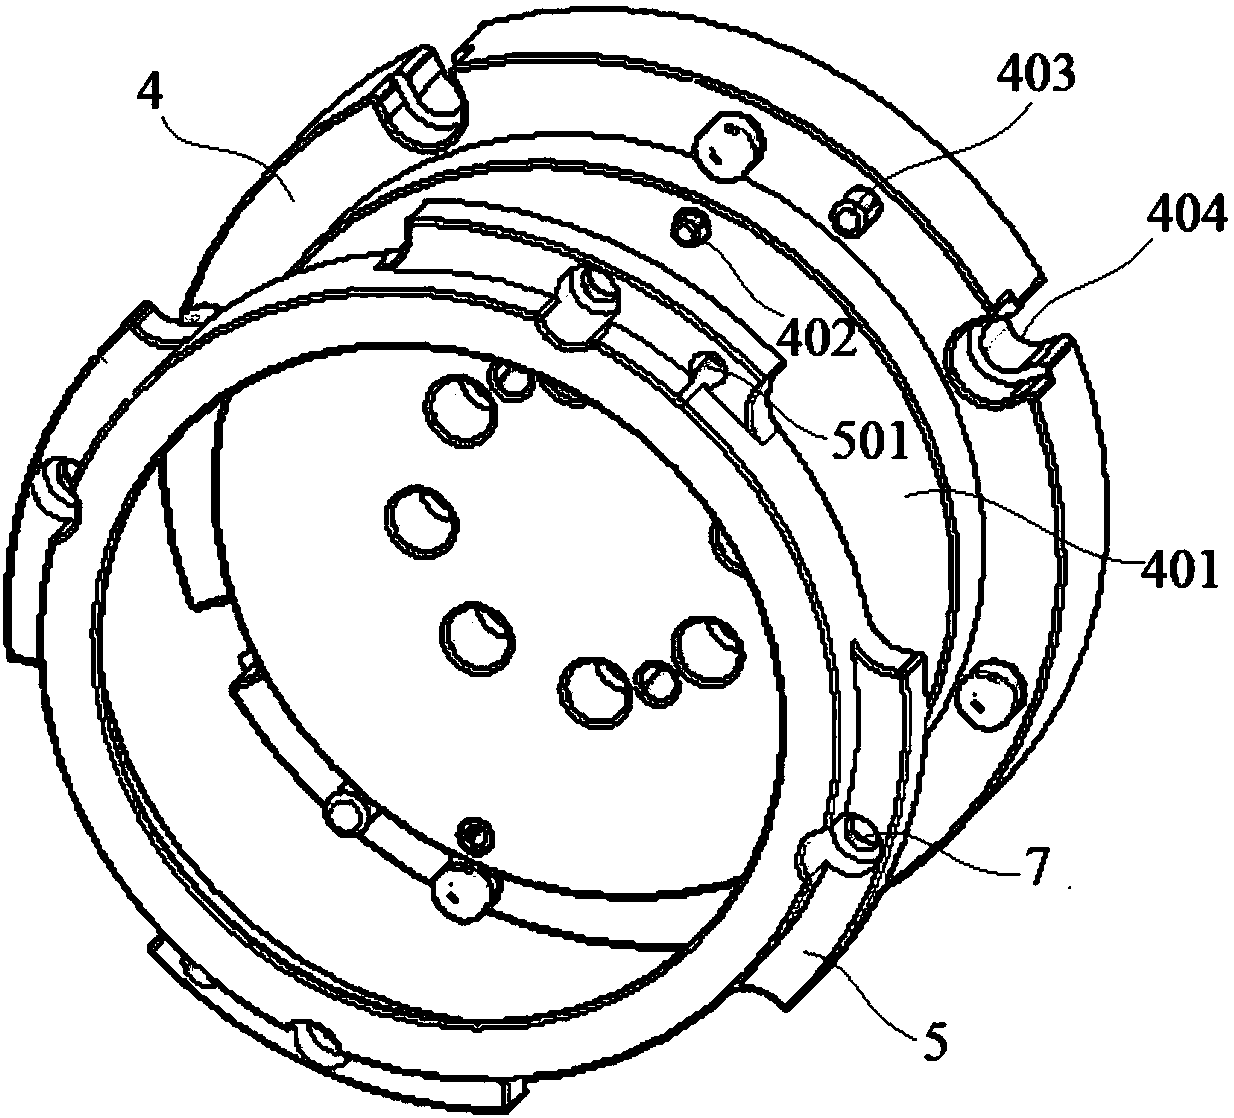 Four-axle rotary machining fixture